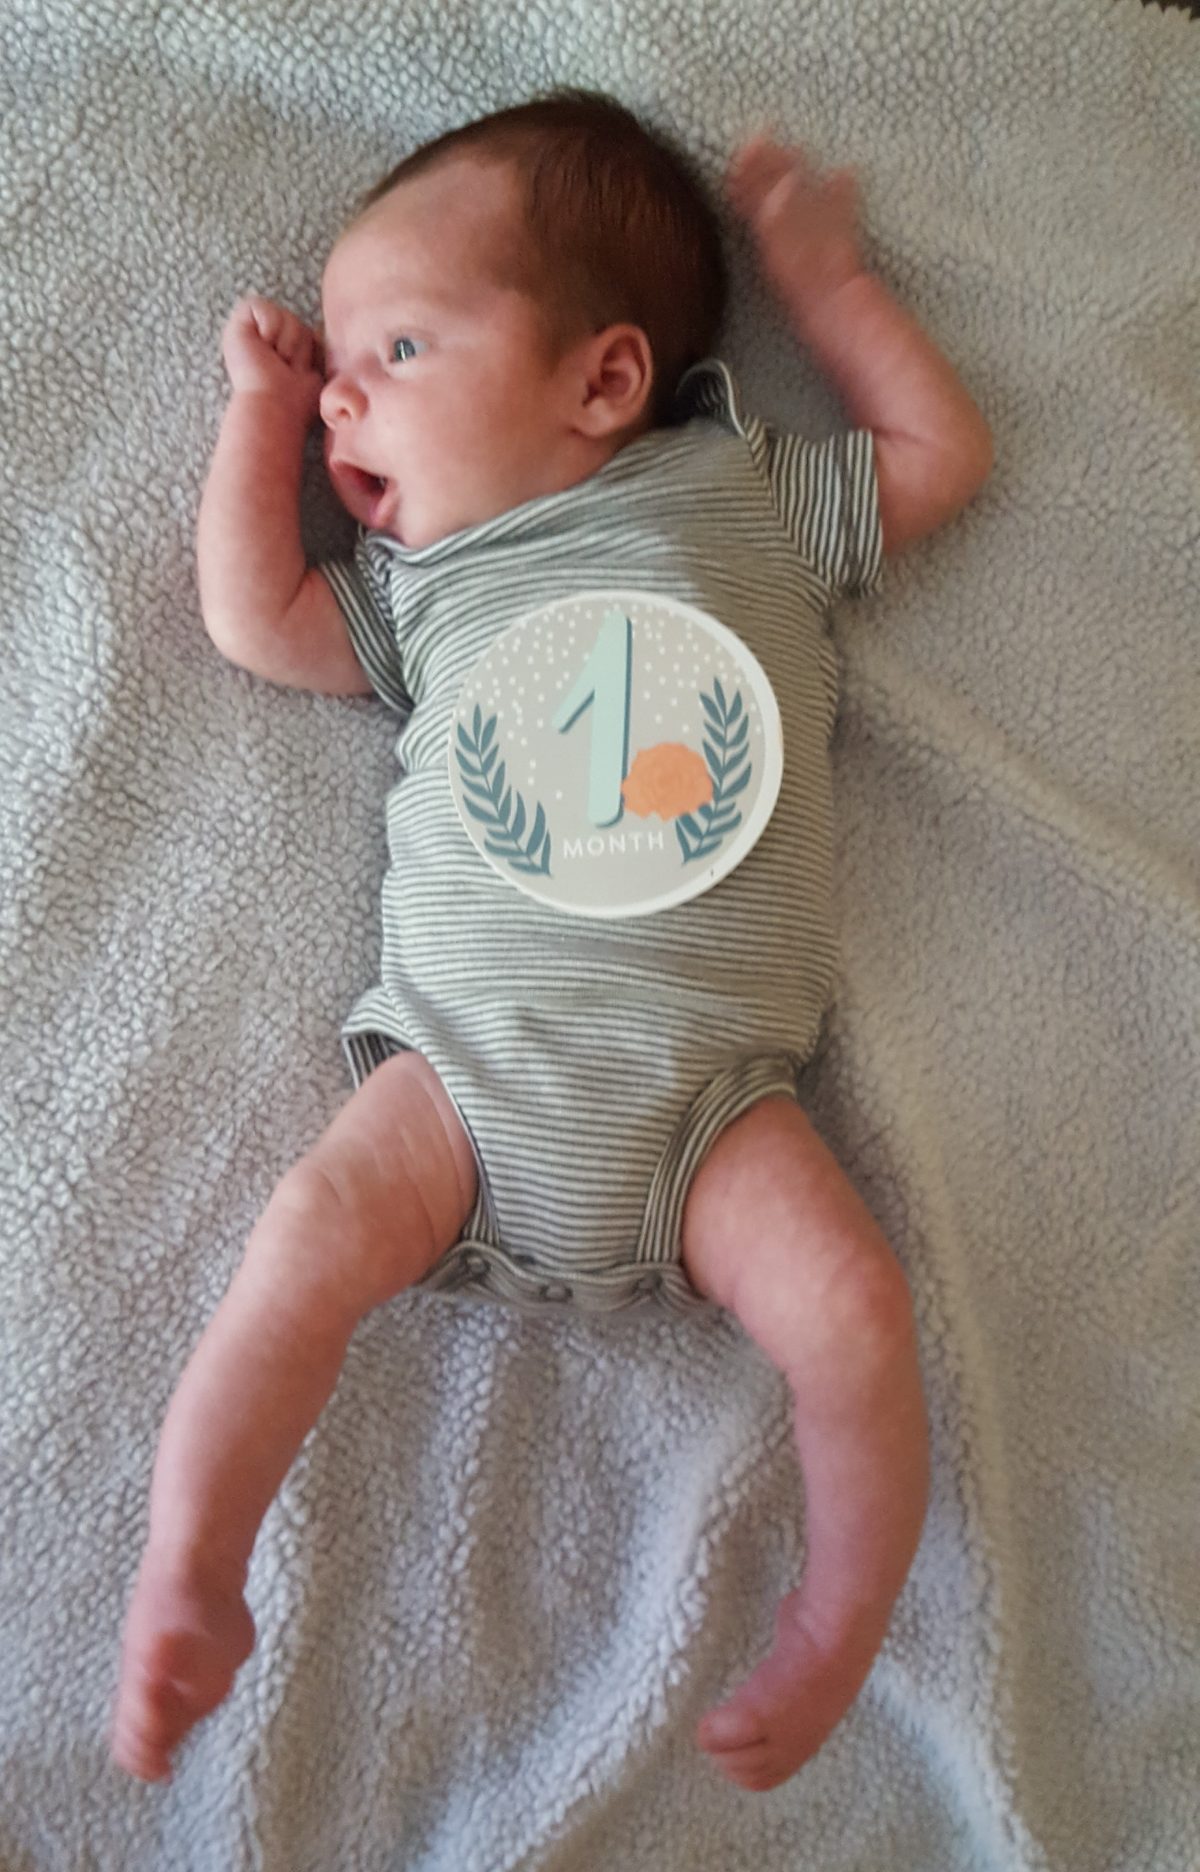 Elliot is One Month Old!